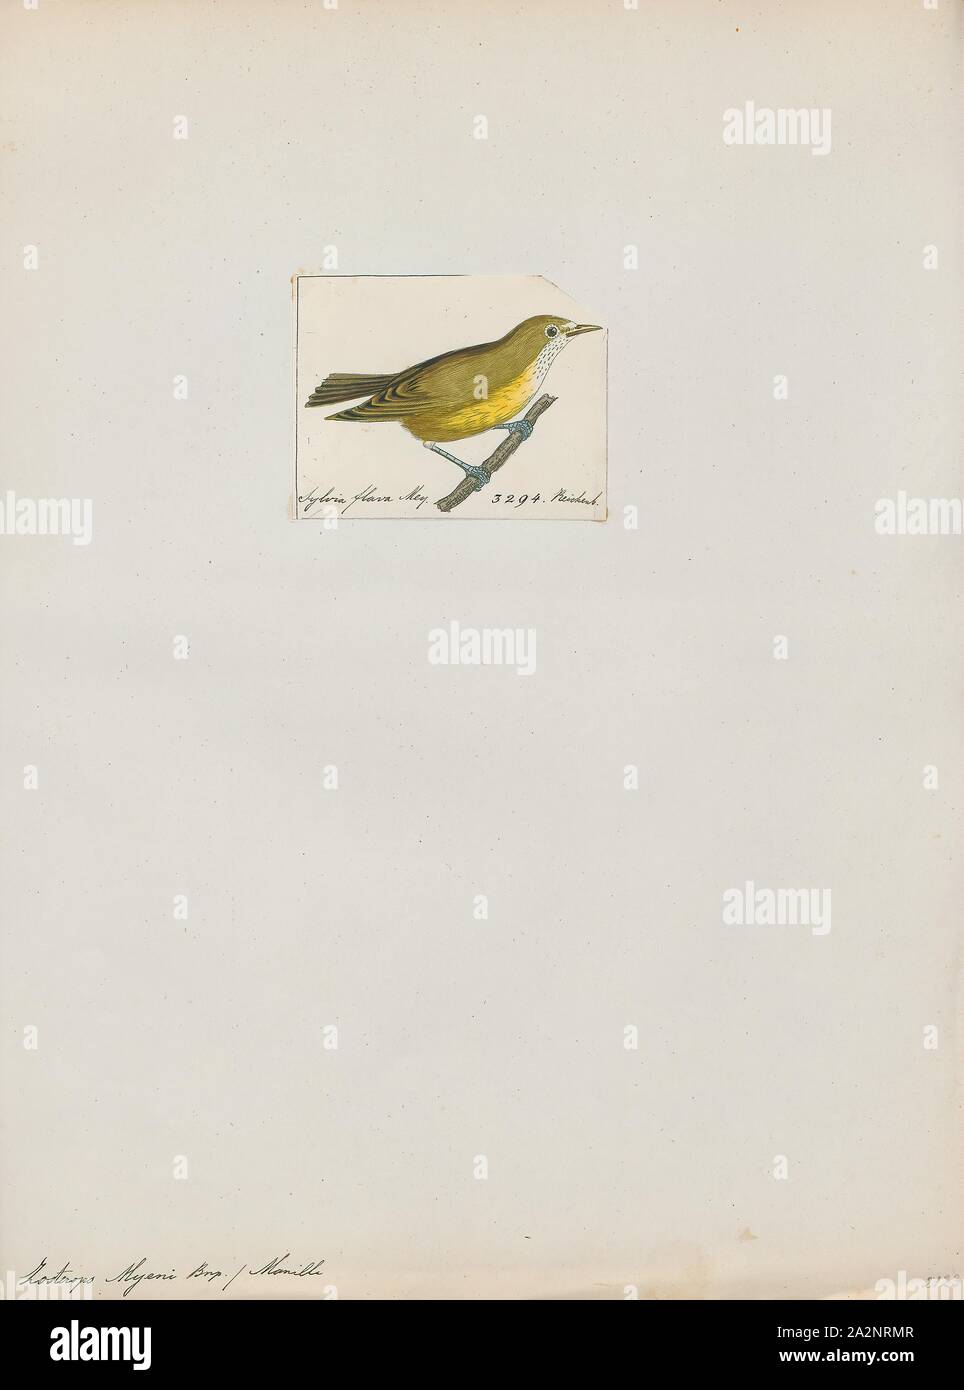 Zosterops meyeni, Print, The lowland white-eye (Zosterops meyeni) is a species of bird in the family Zosteropidae., 1820-1860 Stock Photo